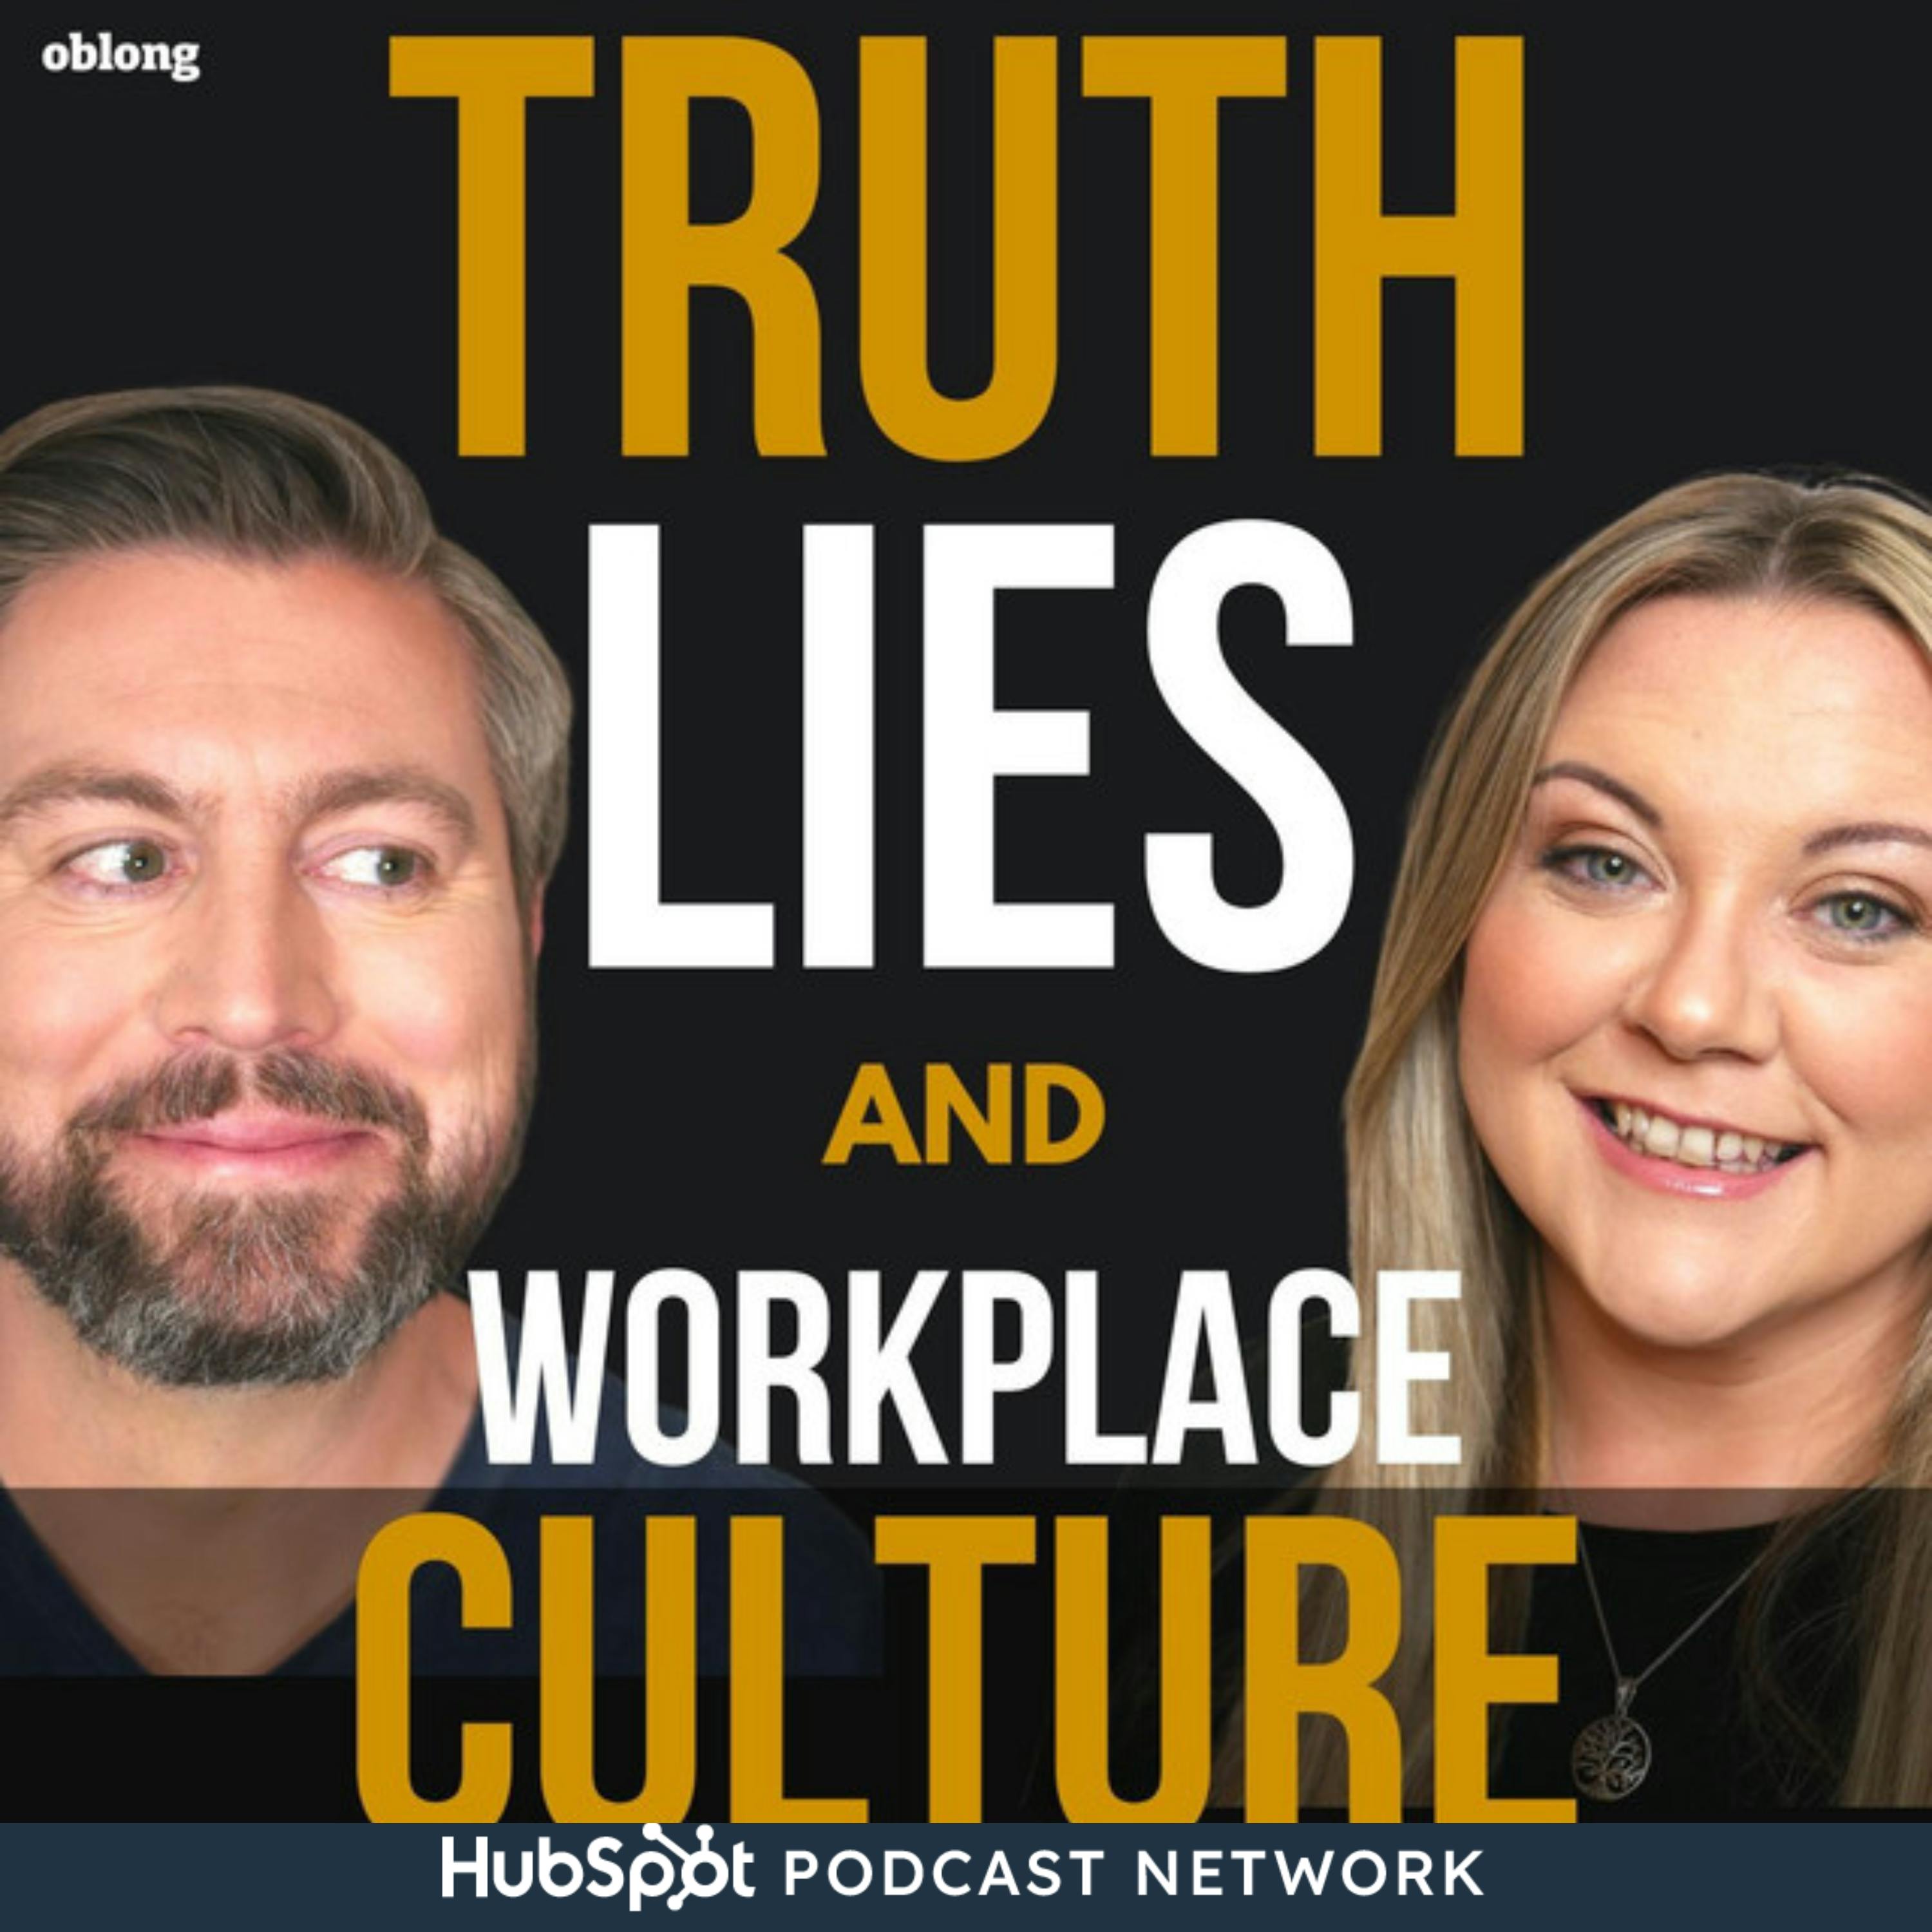 Leanne Elliott: The truth behind the Psychology of People - Our Co-Host’s Story